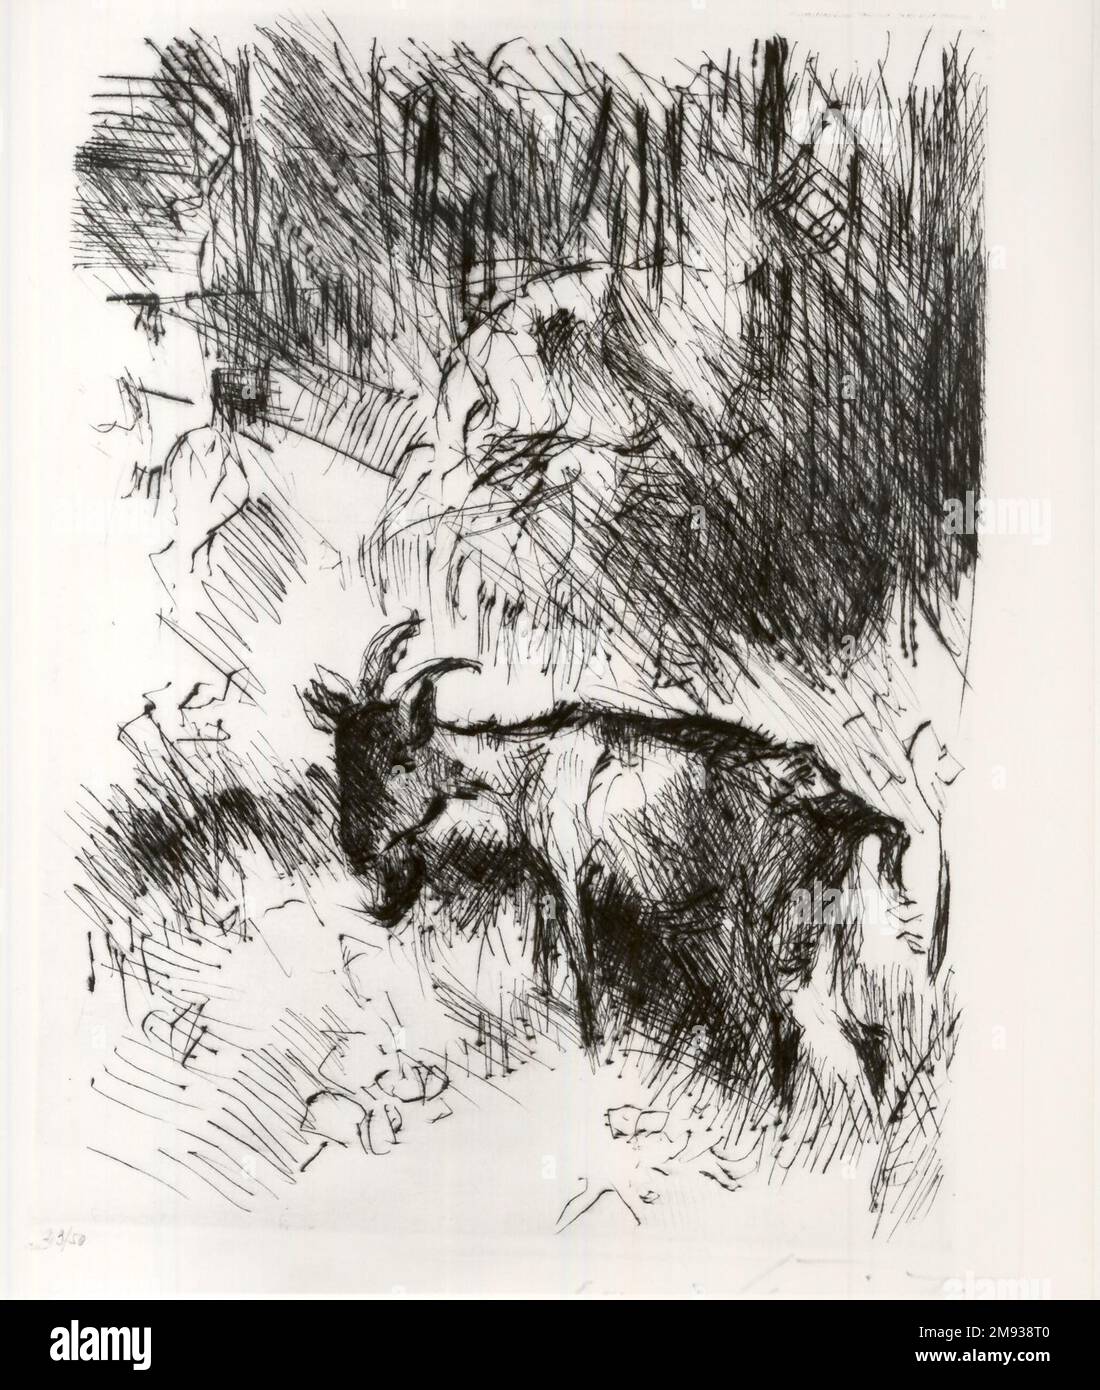 The Billy Goat (Die Ziegenbock) Lovis Corinth (German, 1858-1925). , 1920. Etching and drypoint on wove paper, Image (Plate): 9 15/16 x 7 1/4 in. (25.2 x 18.4 cm).   European Art 1920 Stock Photo